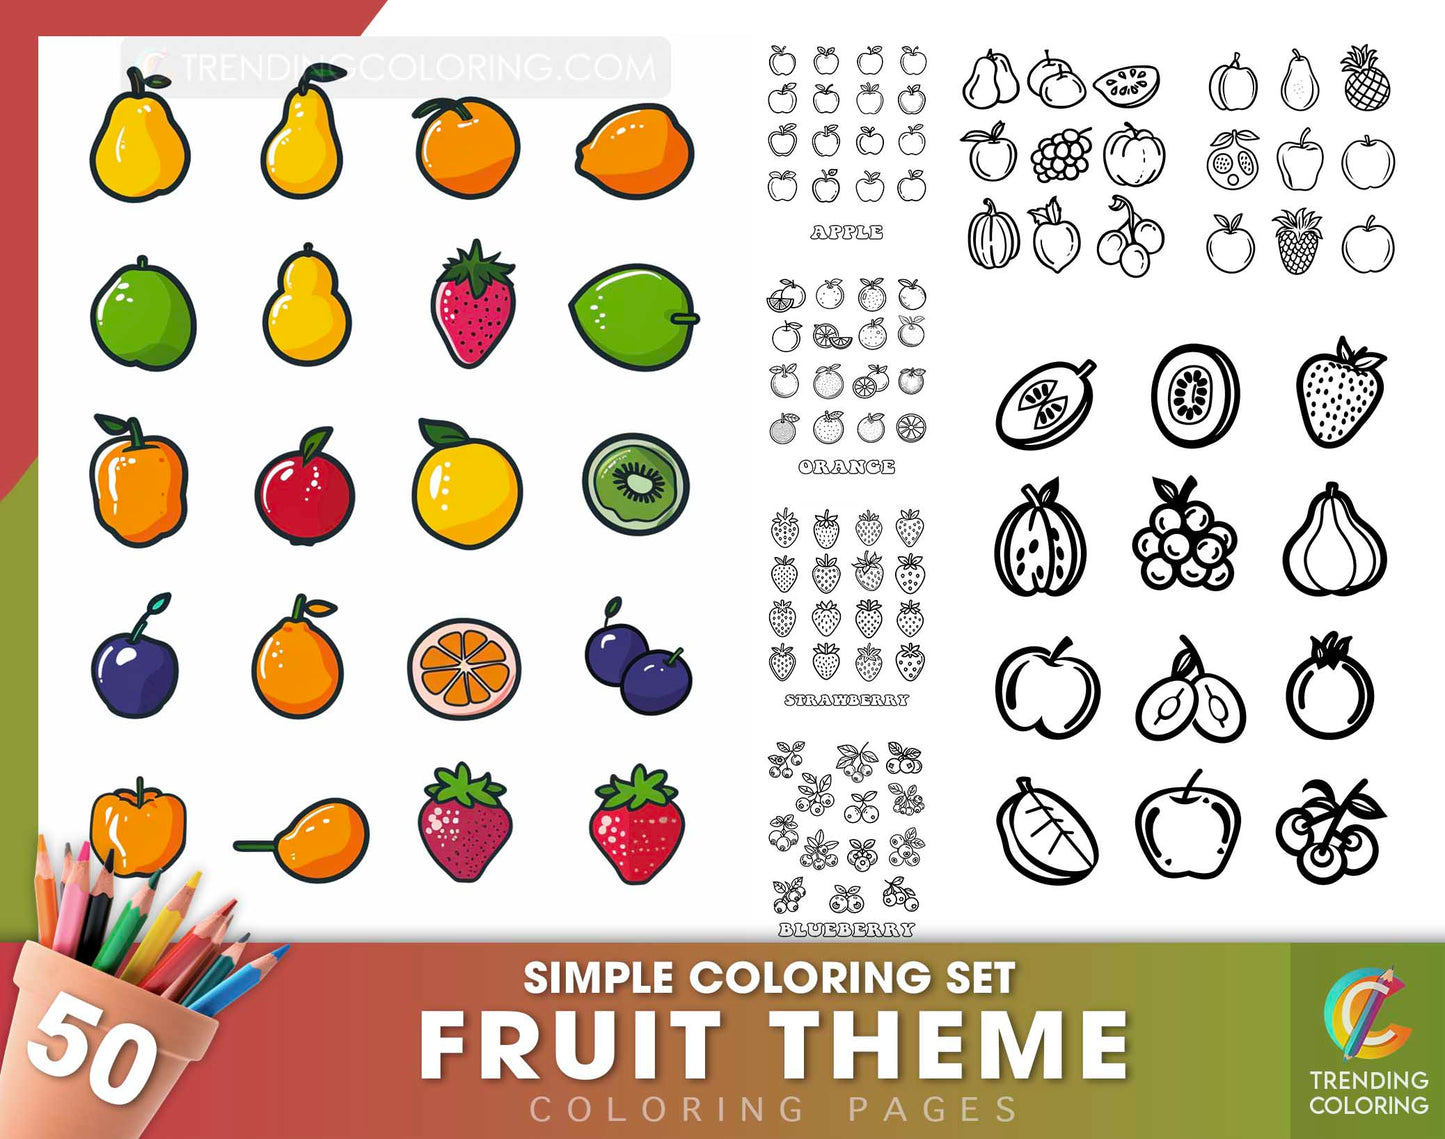 50 Simple Coloring Set - Fruit Theme Coloring Pages - Instant Download - Printable